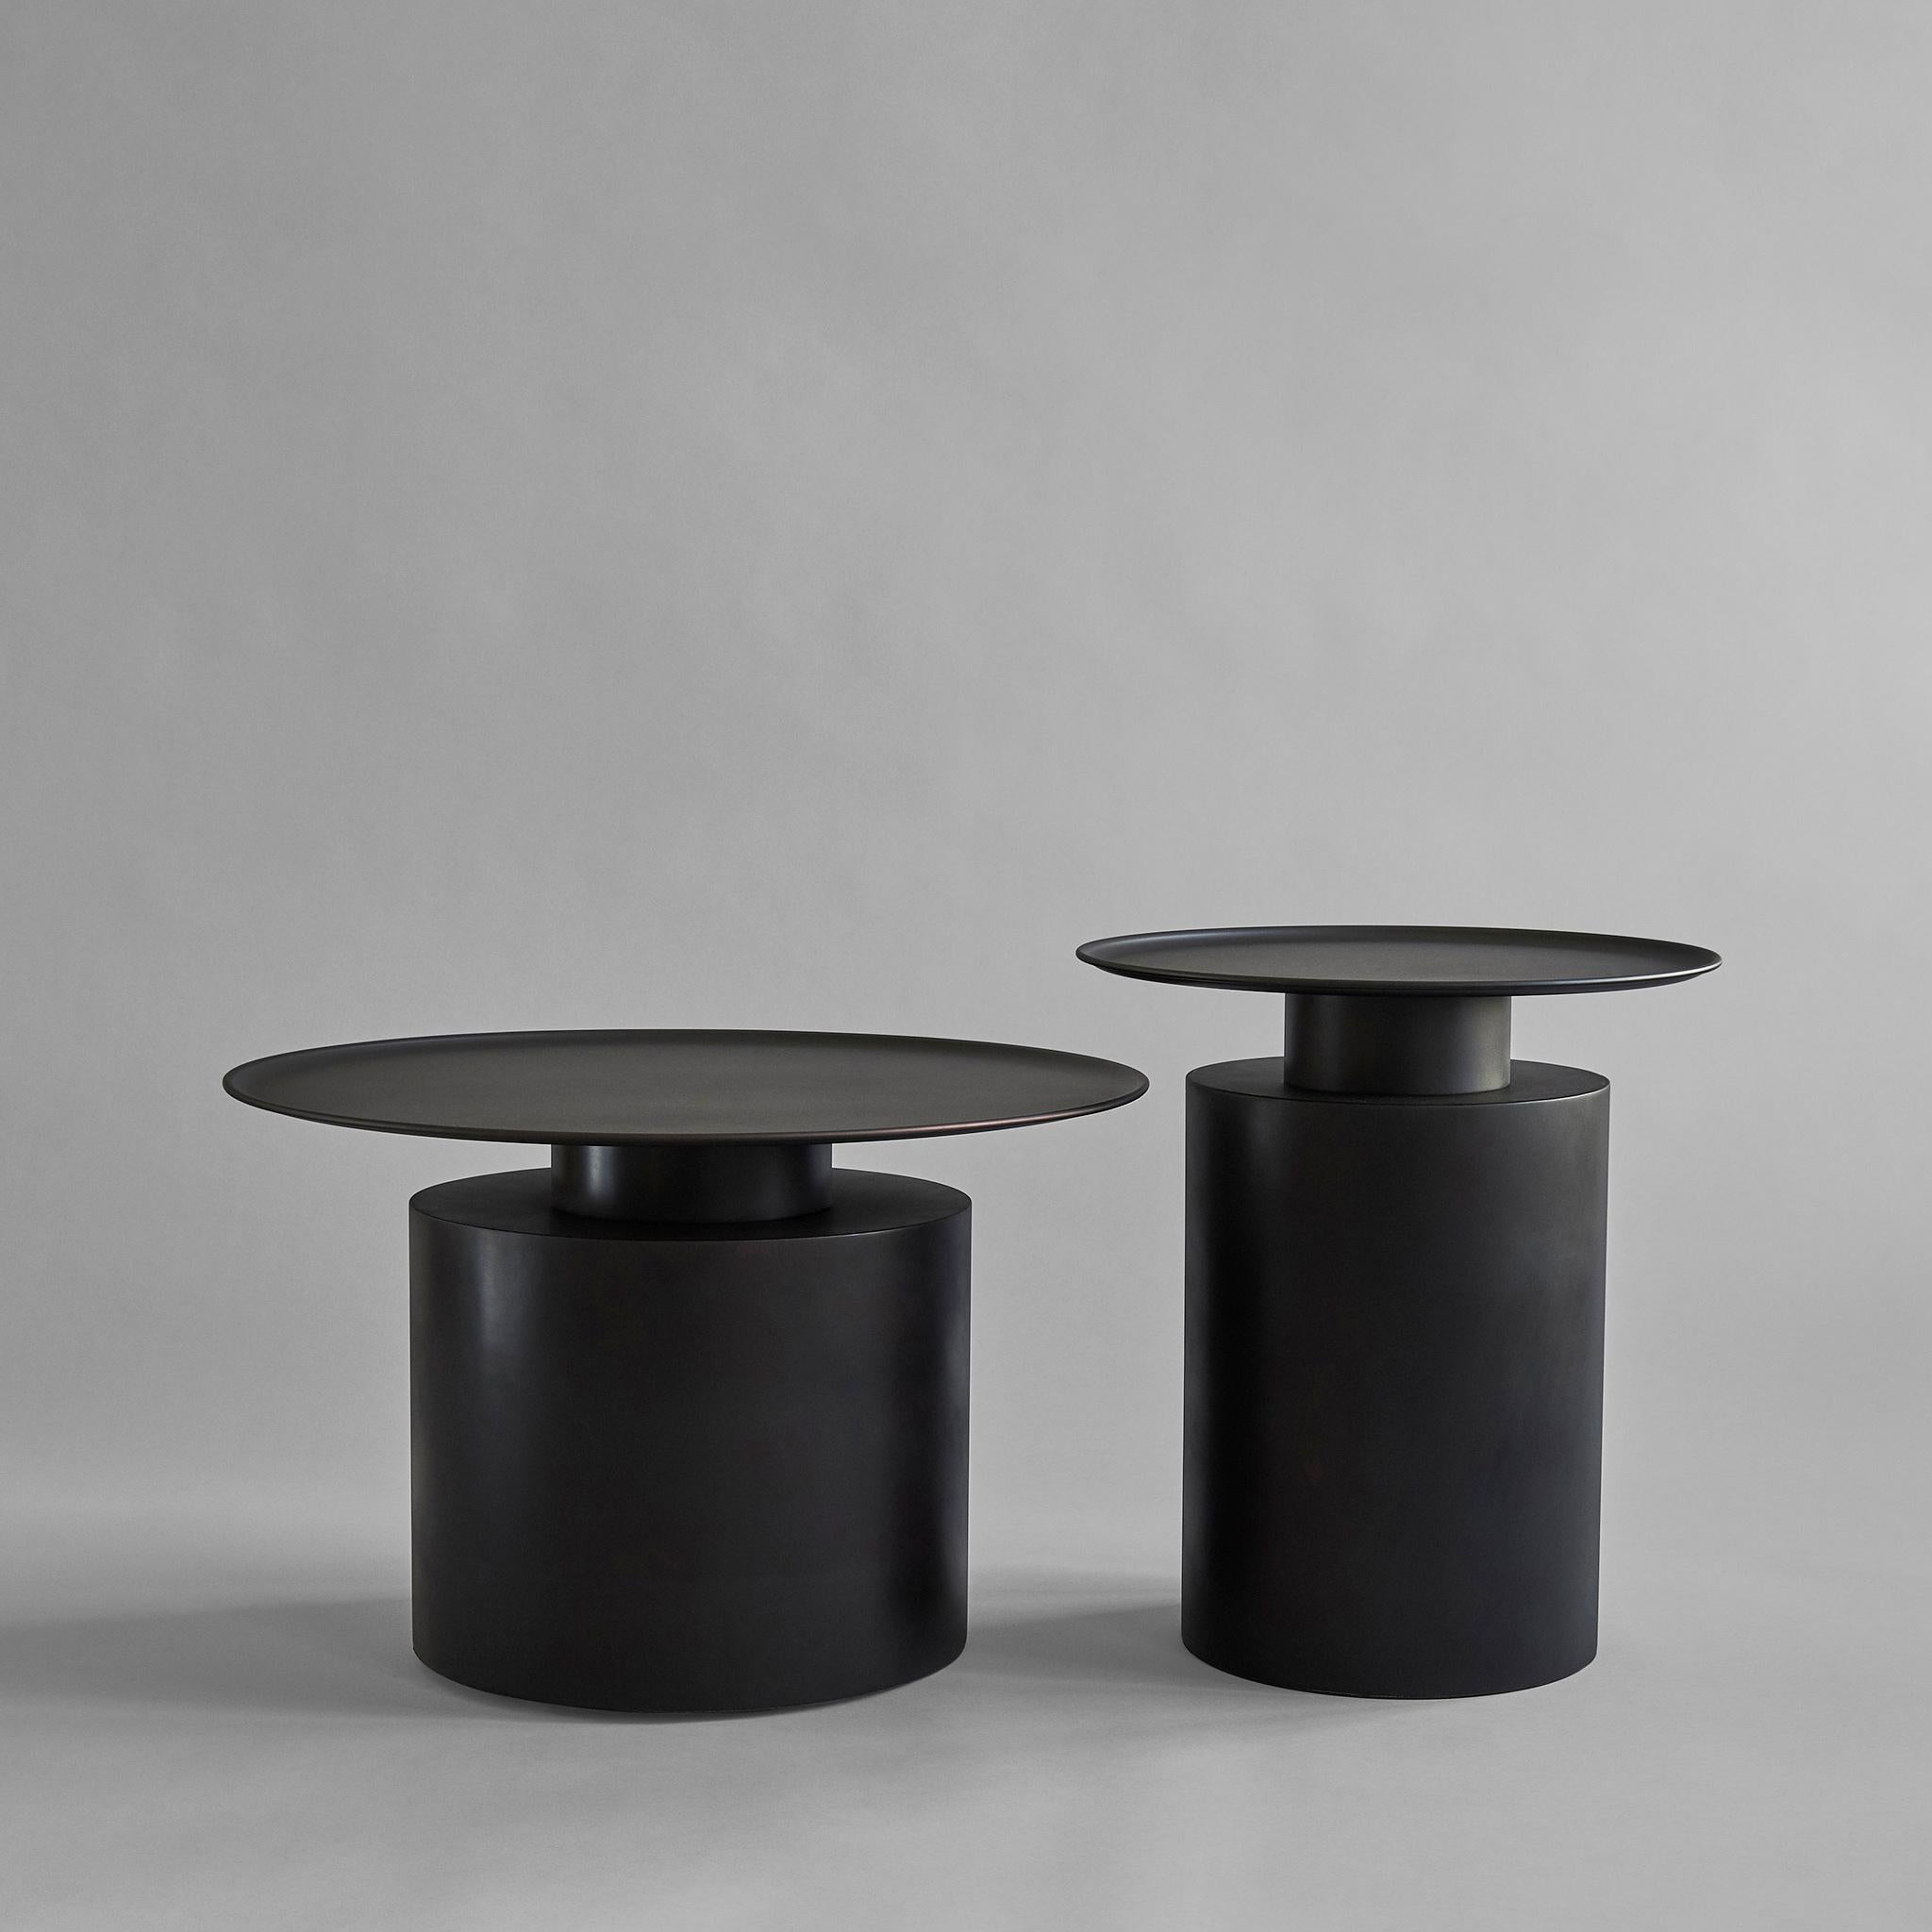 Burned black pillar table low by 101 Copenhagen
Designed by Kristian Sofus Hansen & Tommy Hyldahl
Dimensions: L 41 / W 65 /H 65 cm
Materials: plated metal

Pillar is inspired by the rich lustrous use of material in the 1930´s Art Deco movement.